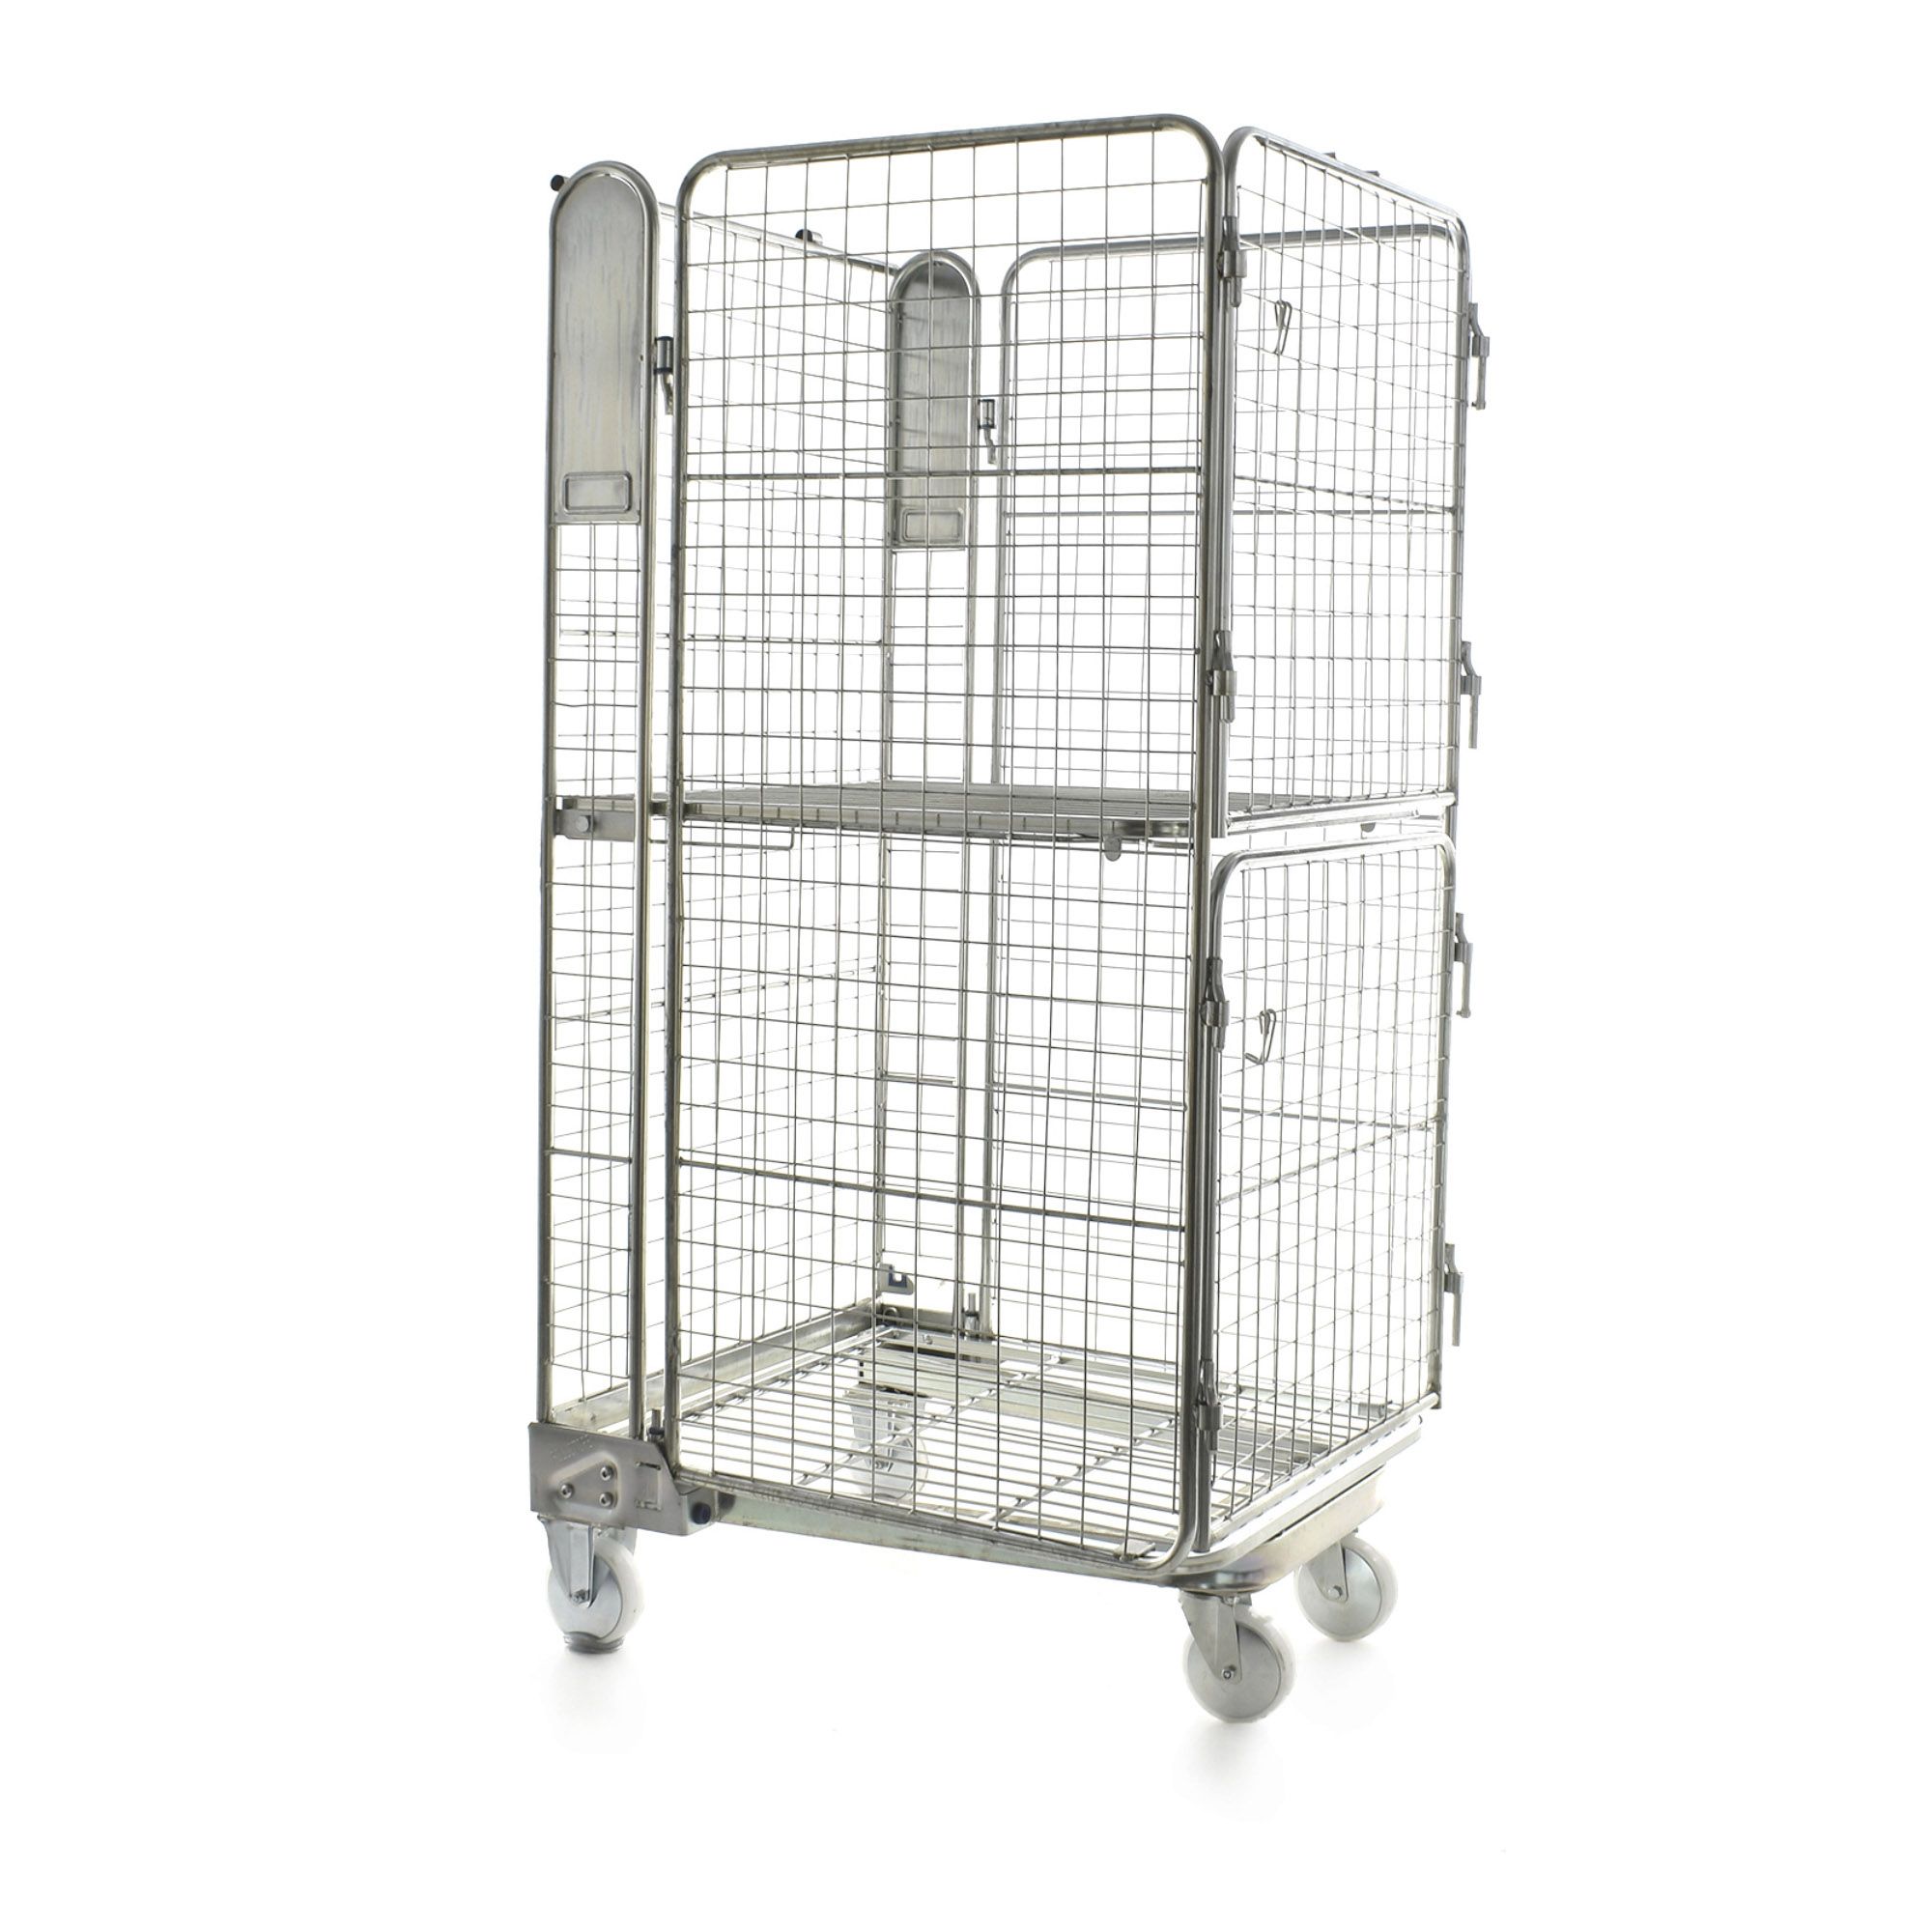 4 Sided A Frame Double Door Mesh